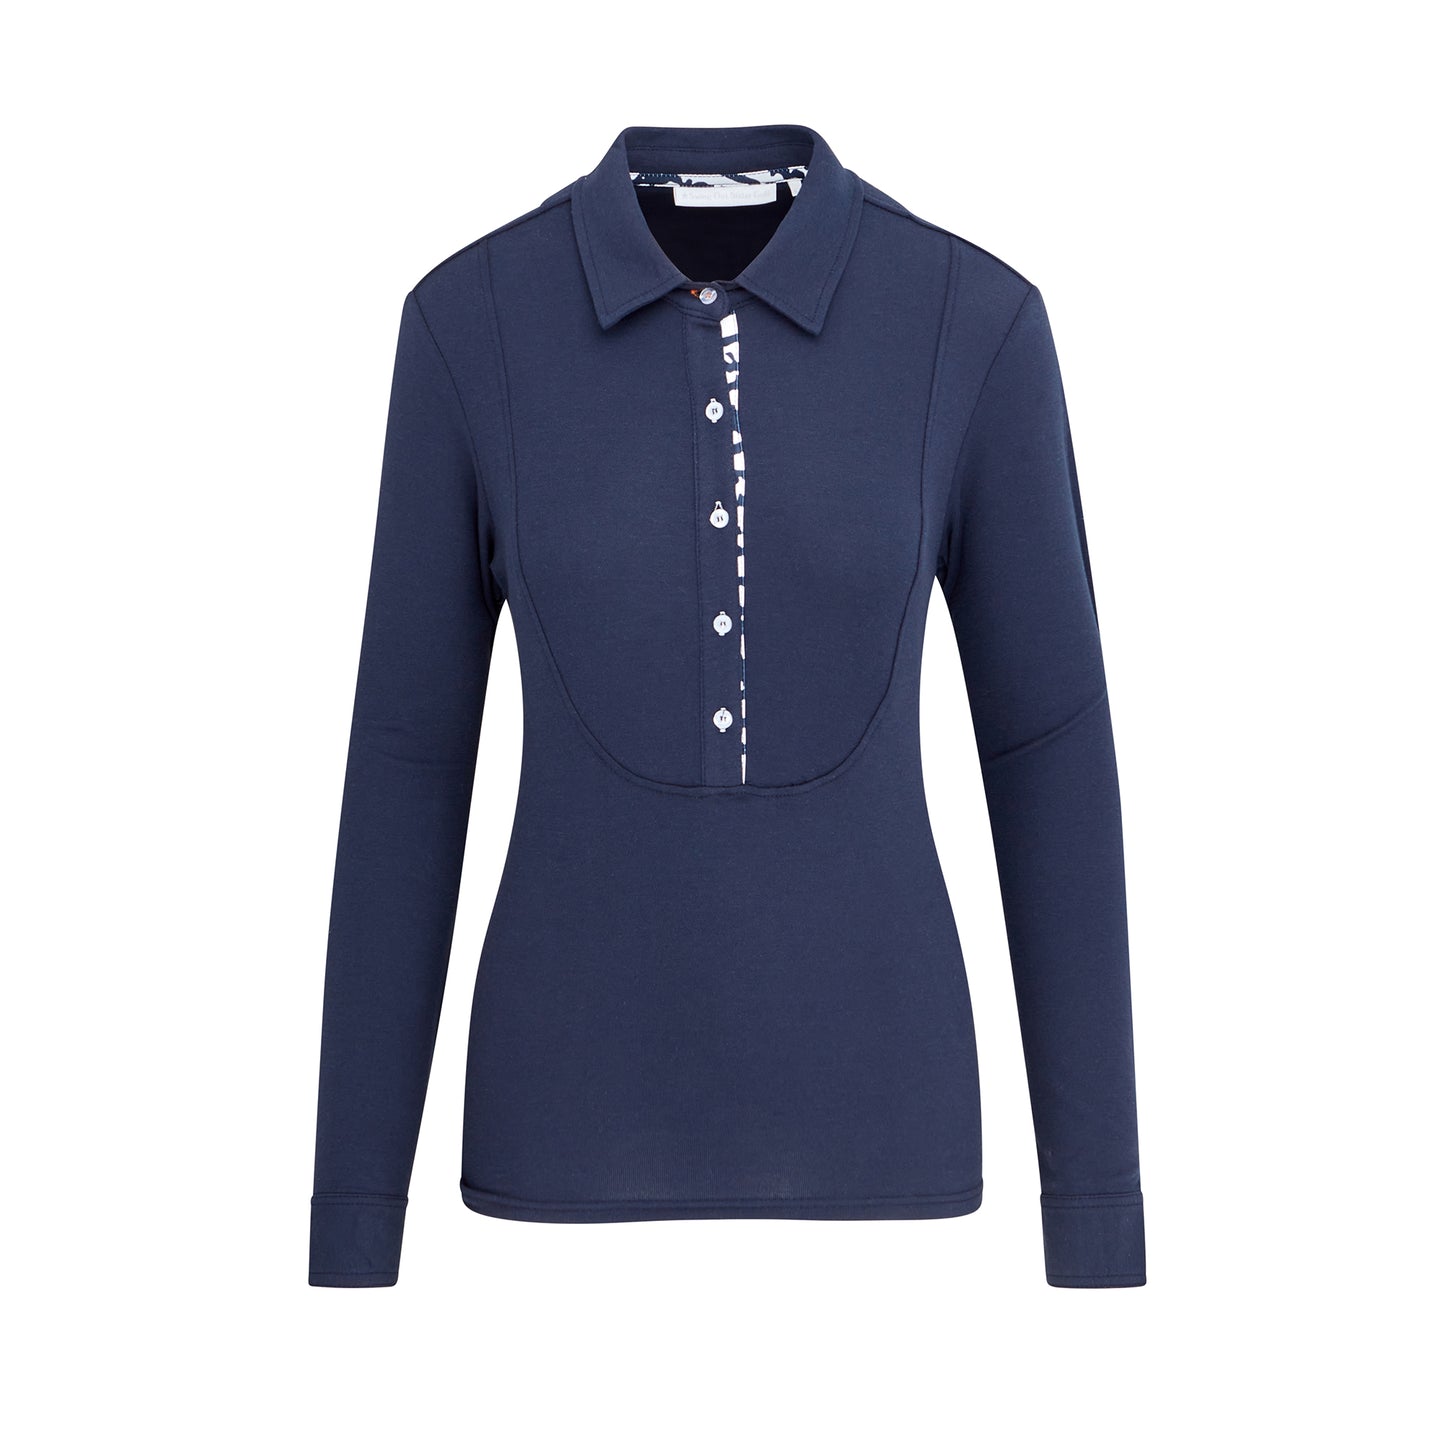 Swing Out Sister Ladies Long Sleeve Polo Shirt with Soft Cotton Finish in Navy Blue